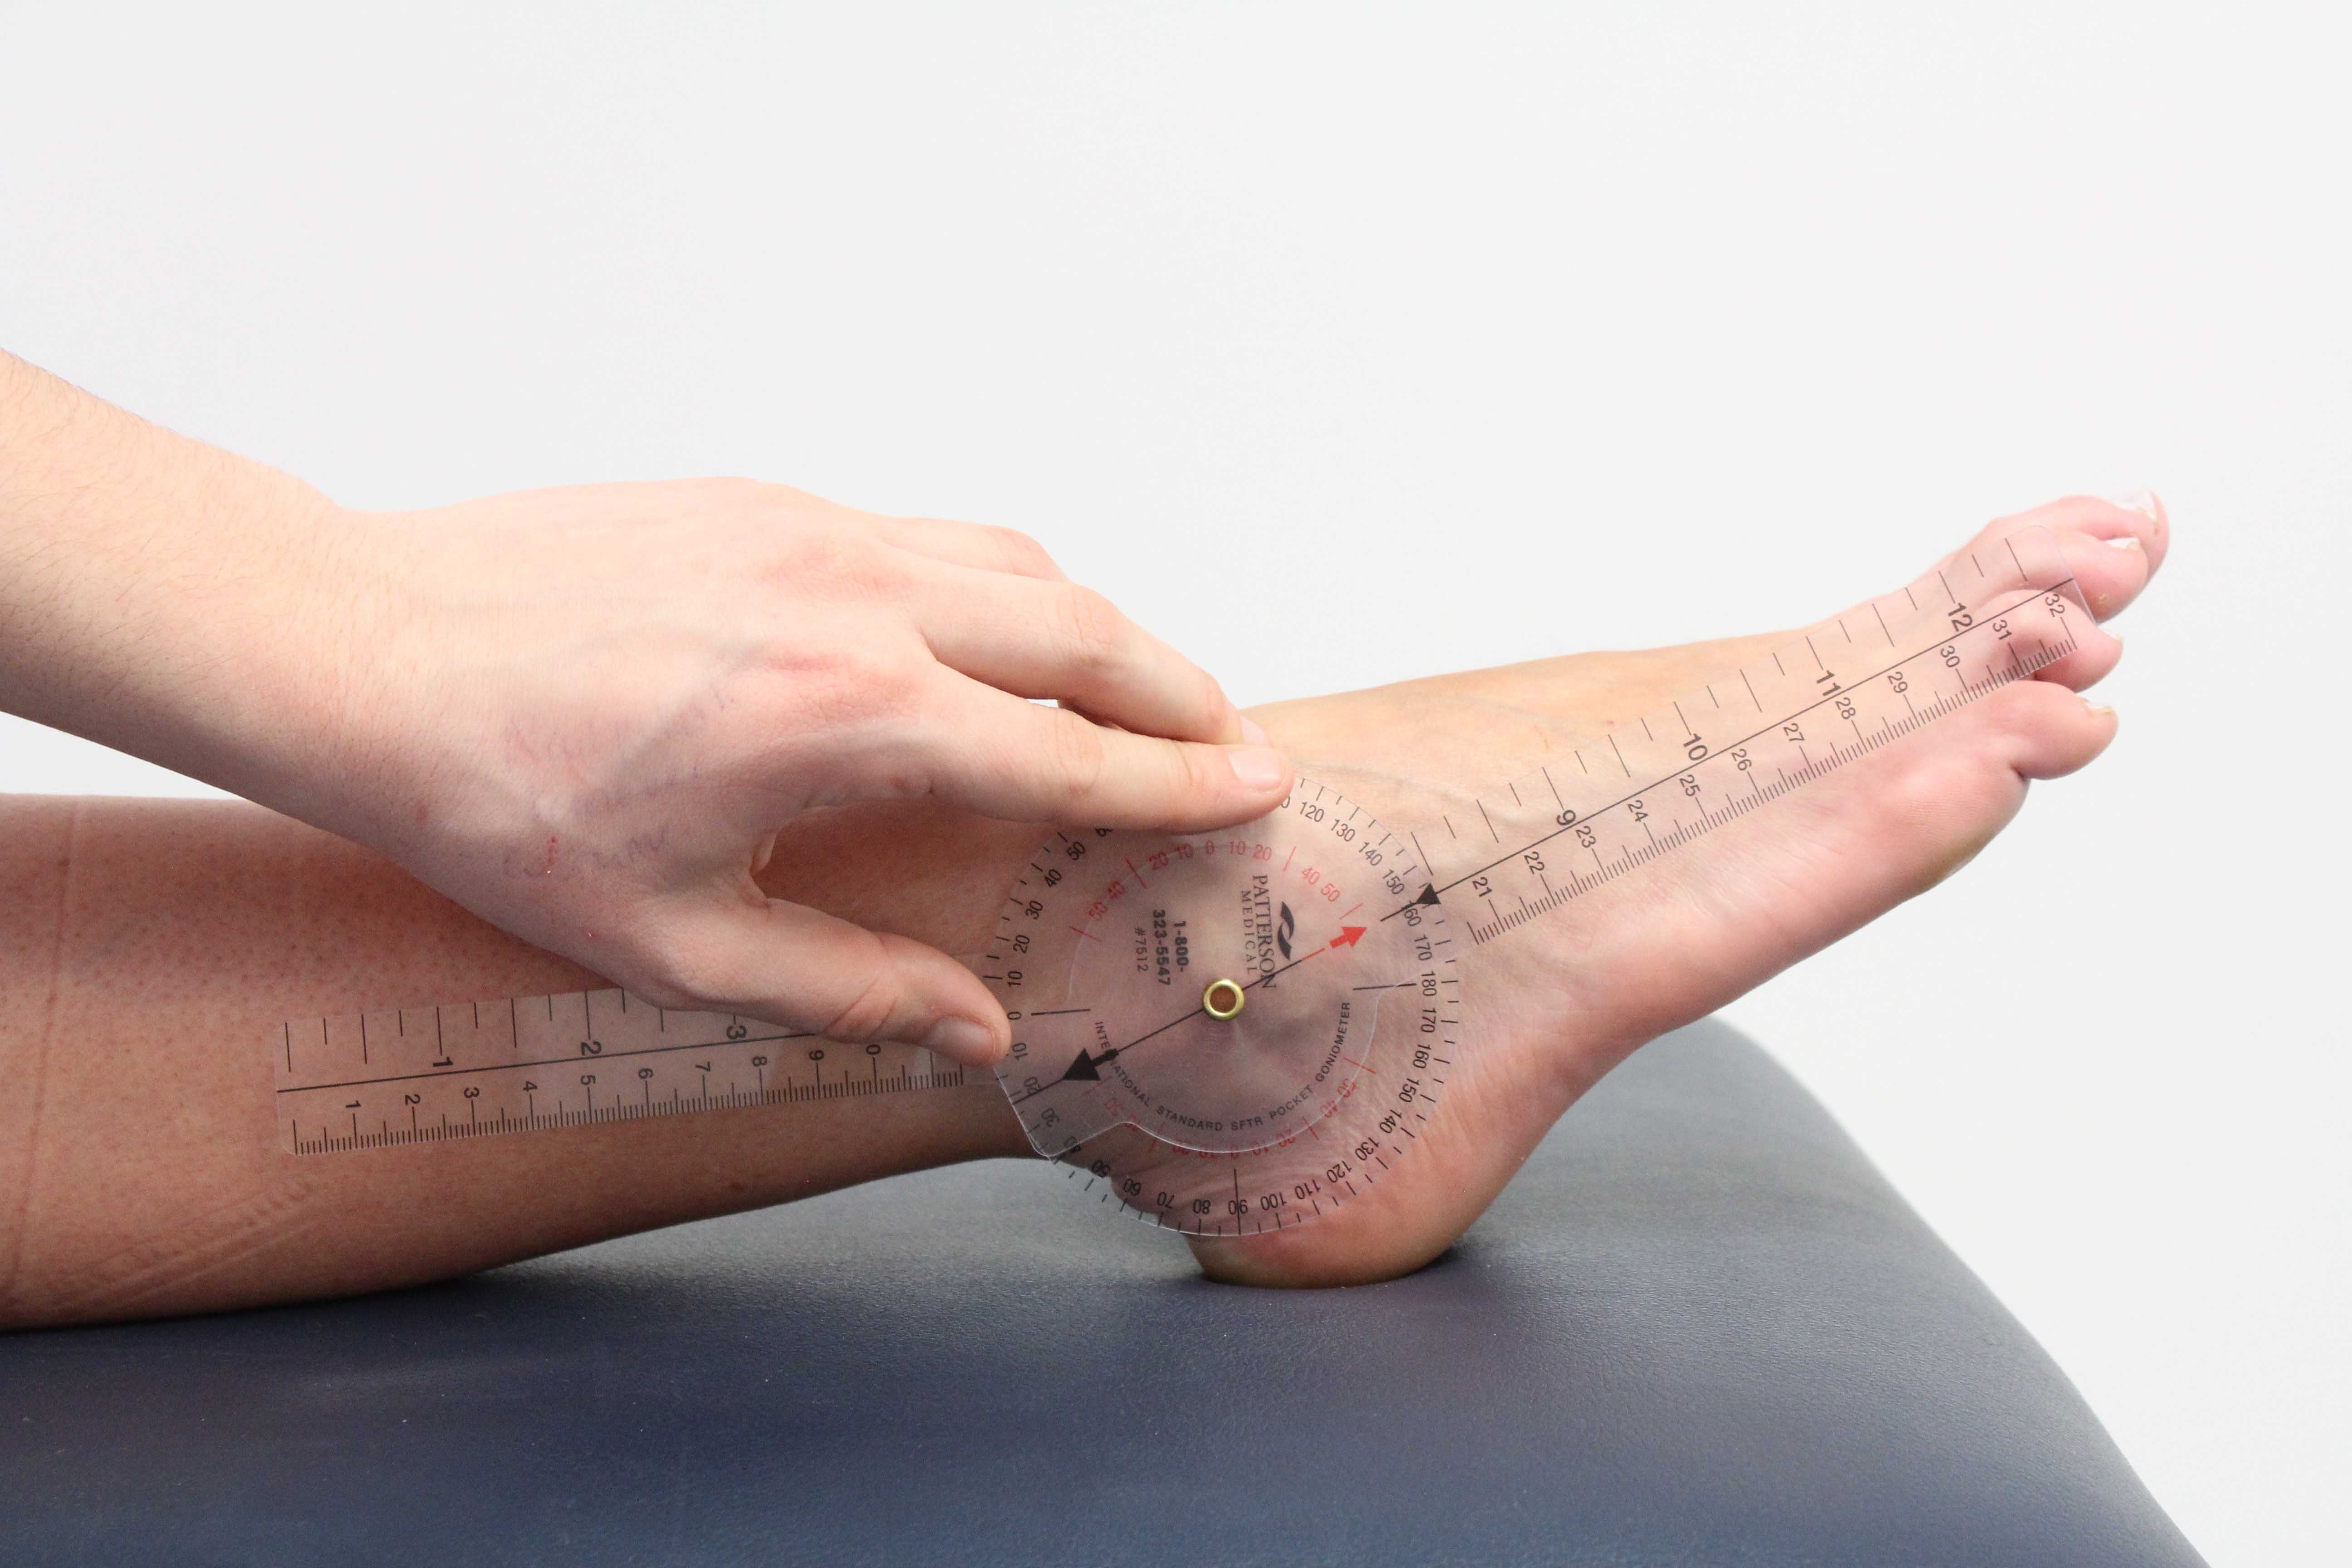 Monitouring ranges of planta-flexion available in the ankle using a goniometer